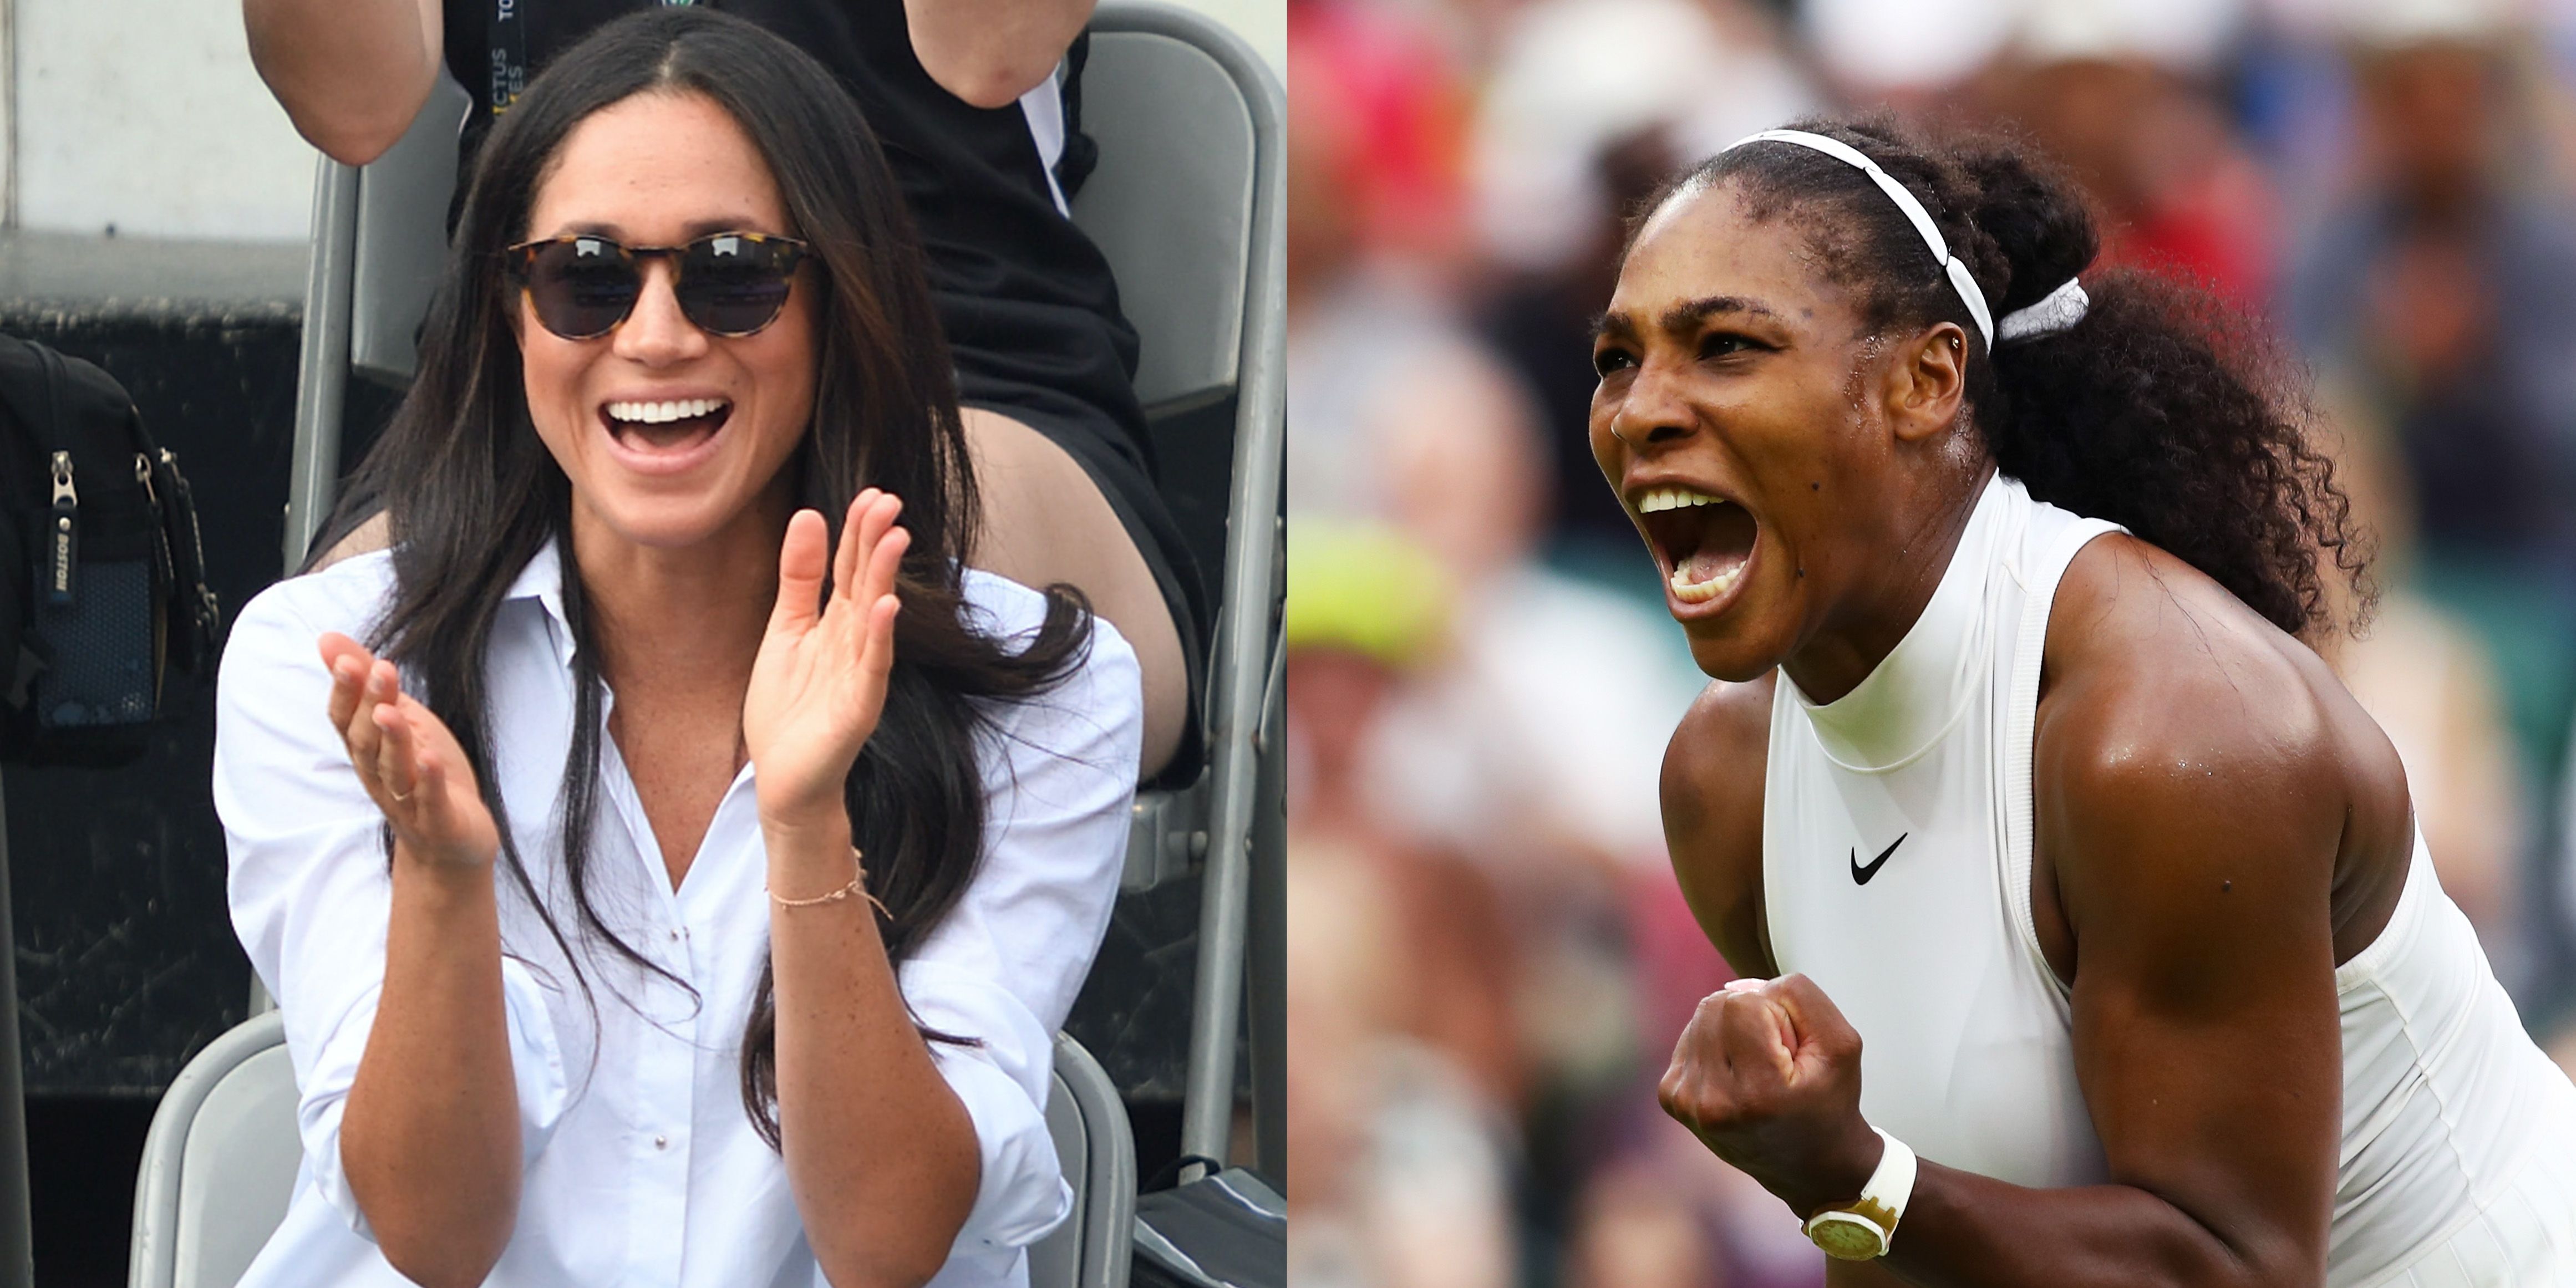 Meghan Markle Rumored to Attend Wimbledon to See Close Friend Serena Williams Play Tennis